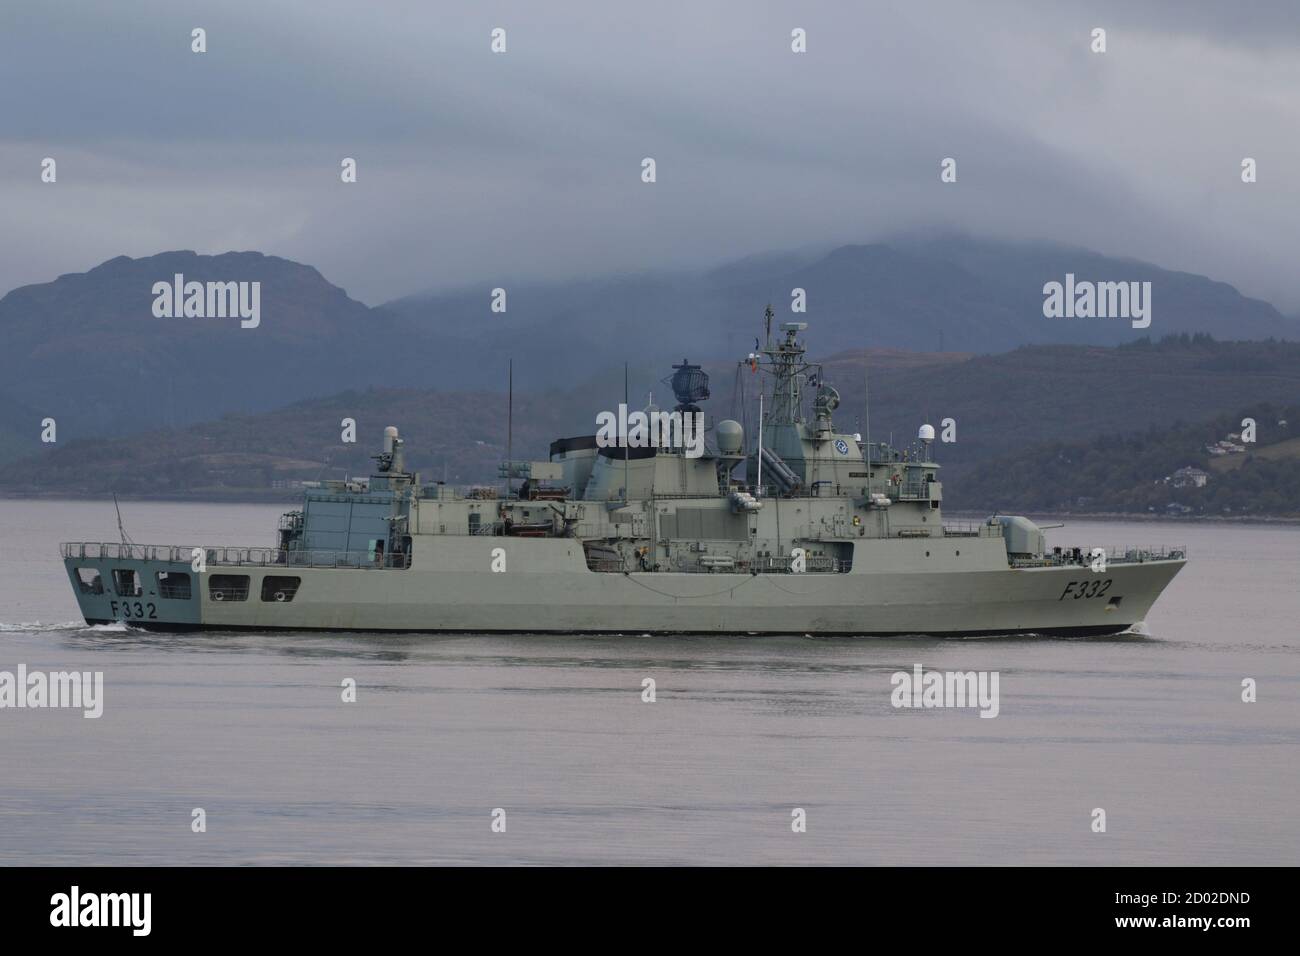 NRP Corte-Real (F332), a Vasco da Gama-class frigate operated by the Portuguese Navy, passing Gourock on her arrival for Exercise Joint Warrior 20-2. Stock Photo